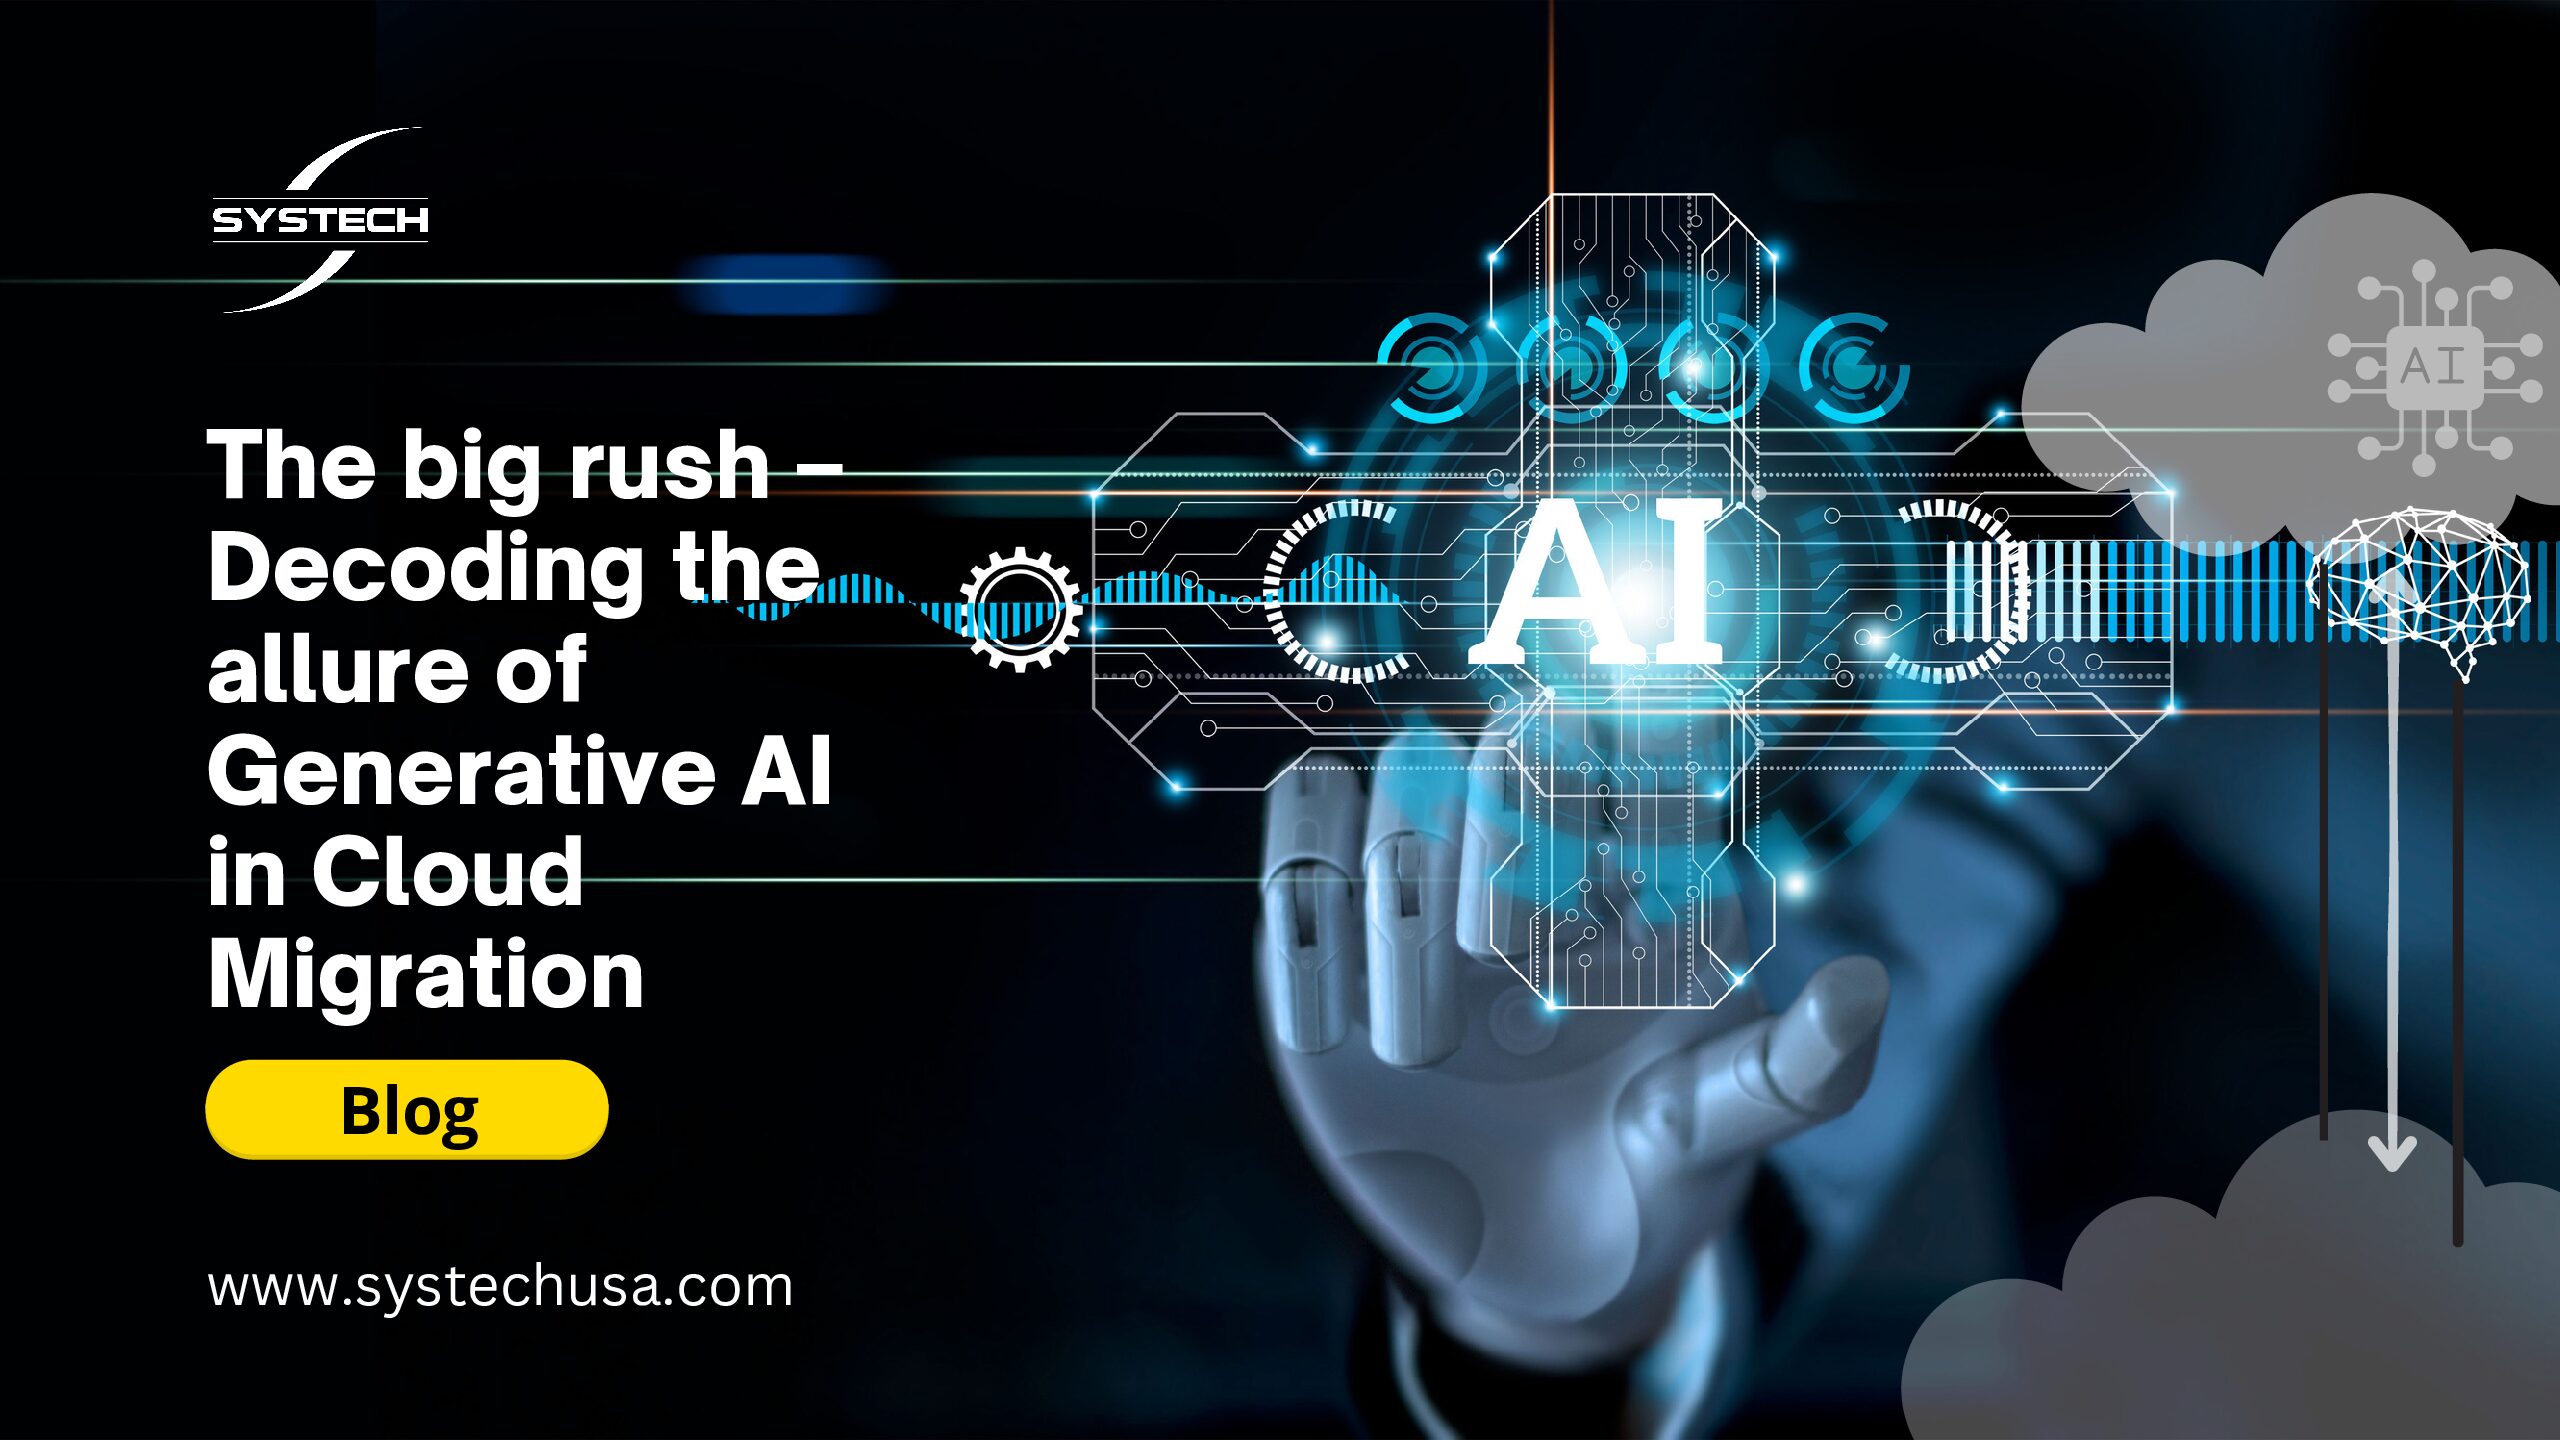 The big rush – Decoding the allure of Generative AI in cloud migration